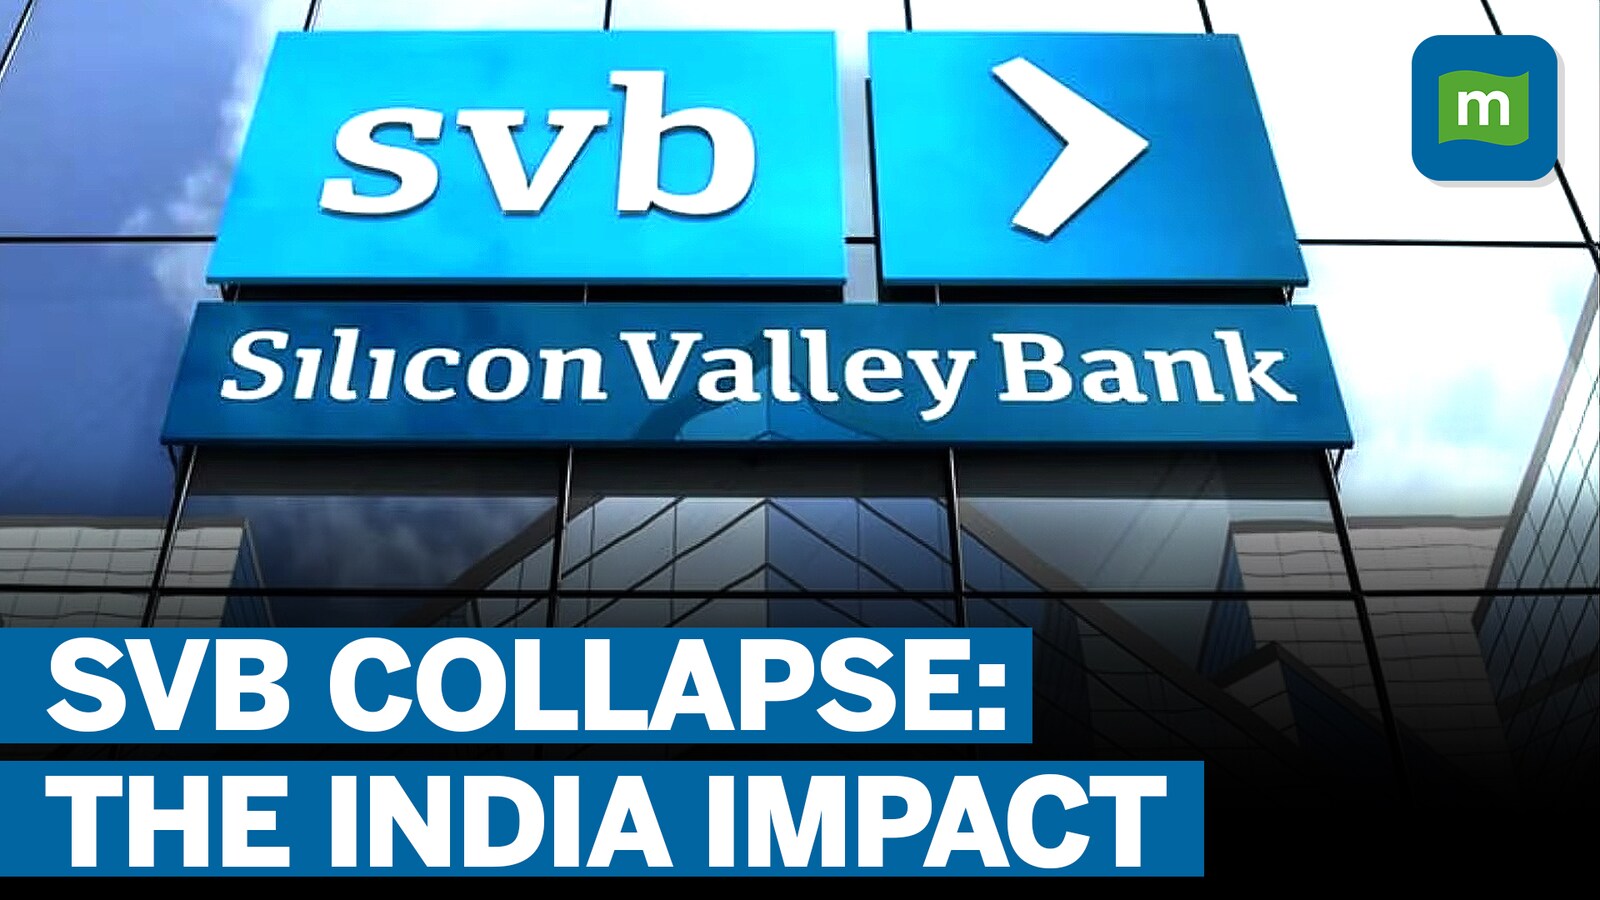 Are these companies really too big to fail? Lessons from the SVB Collapse